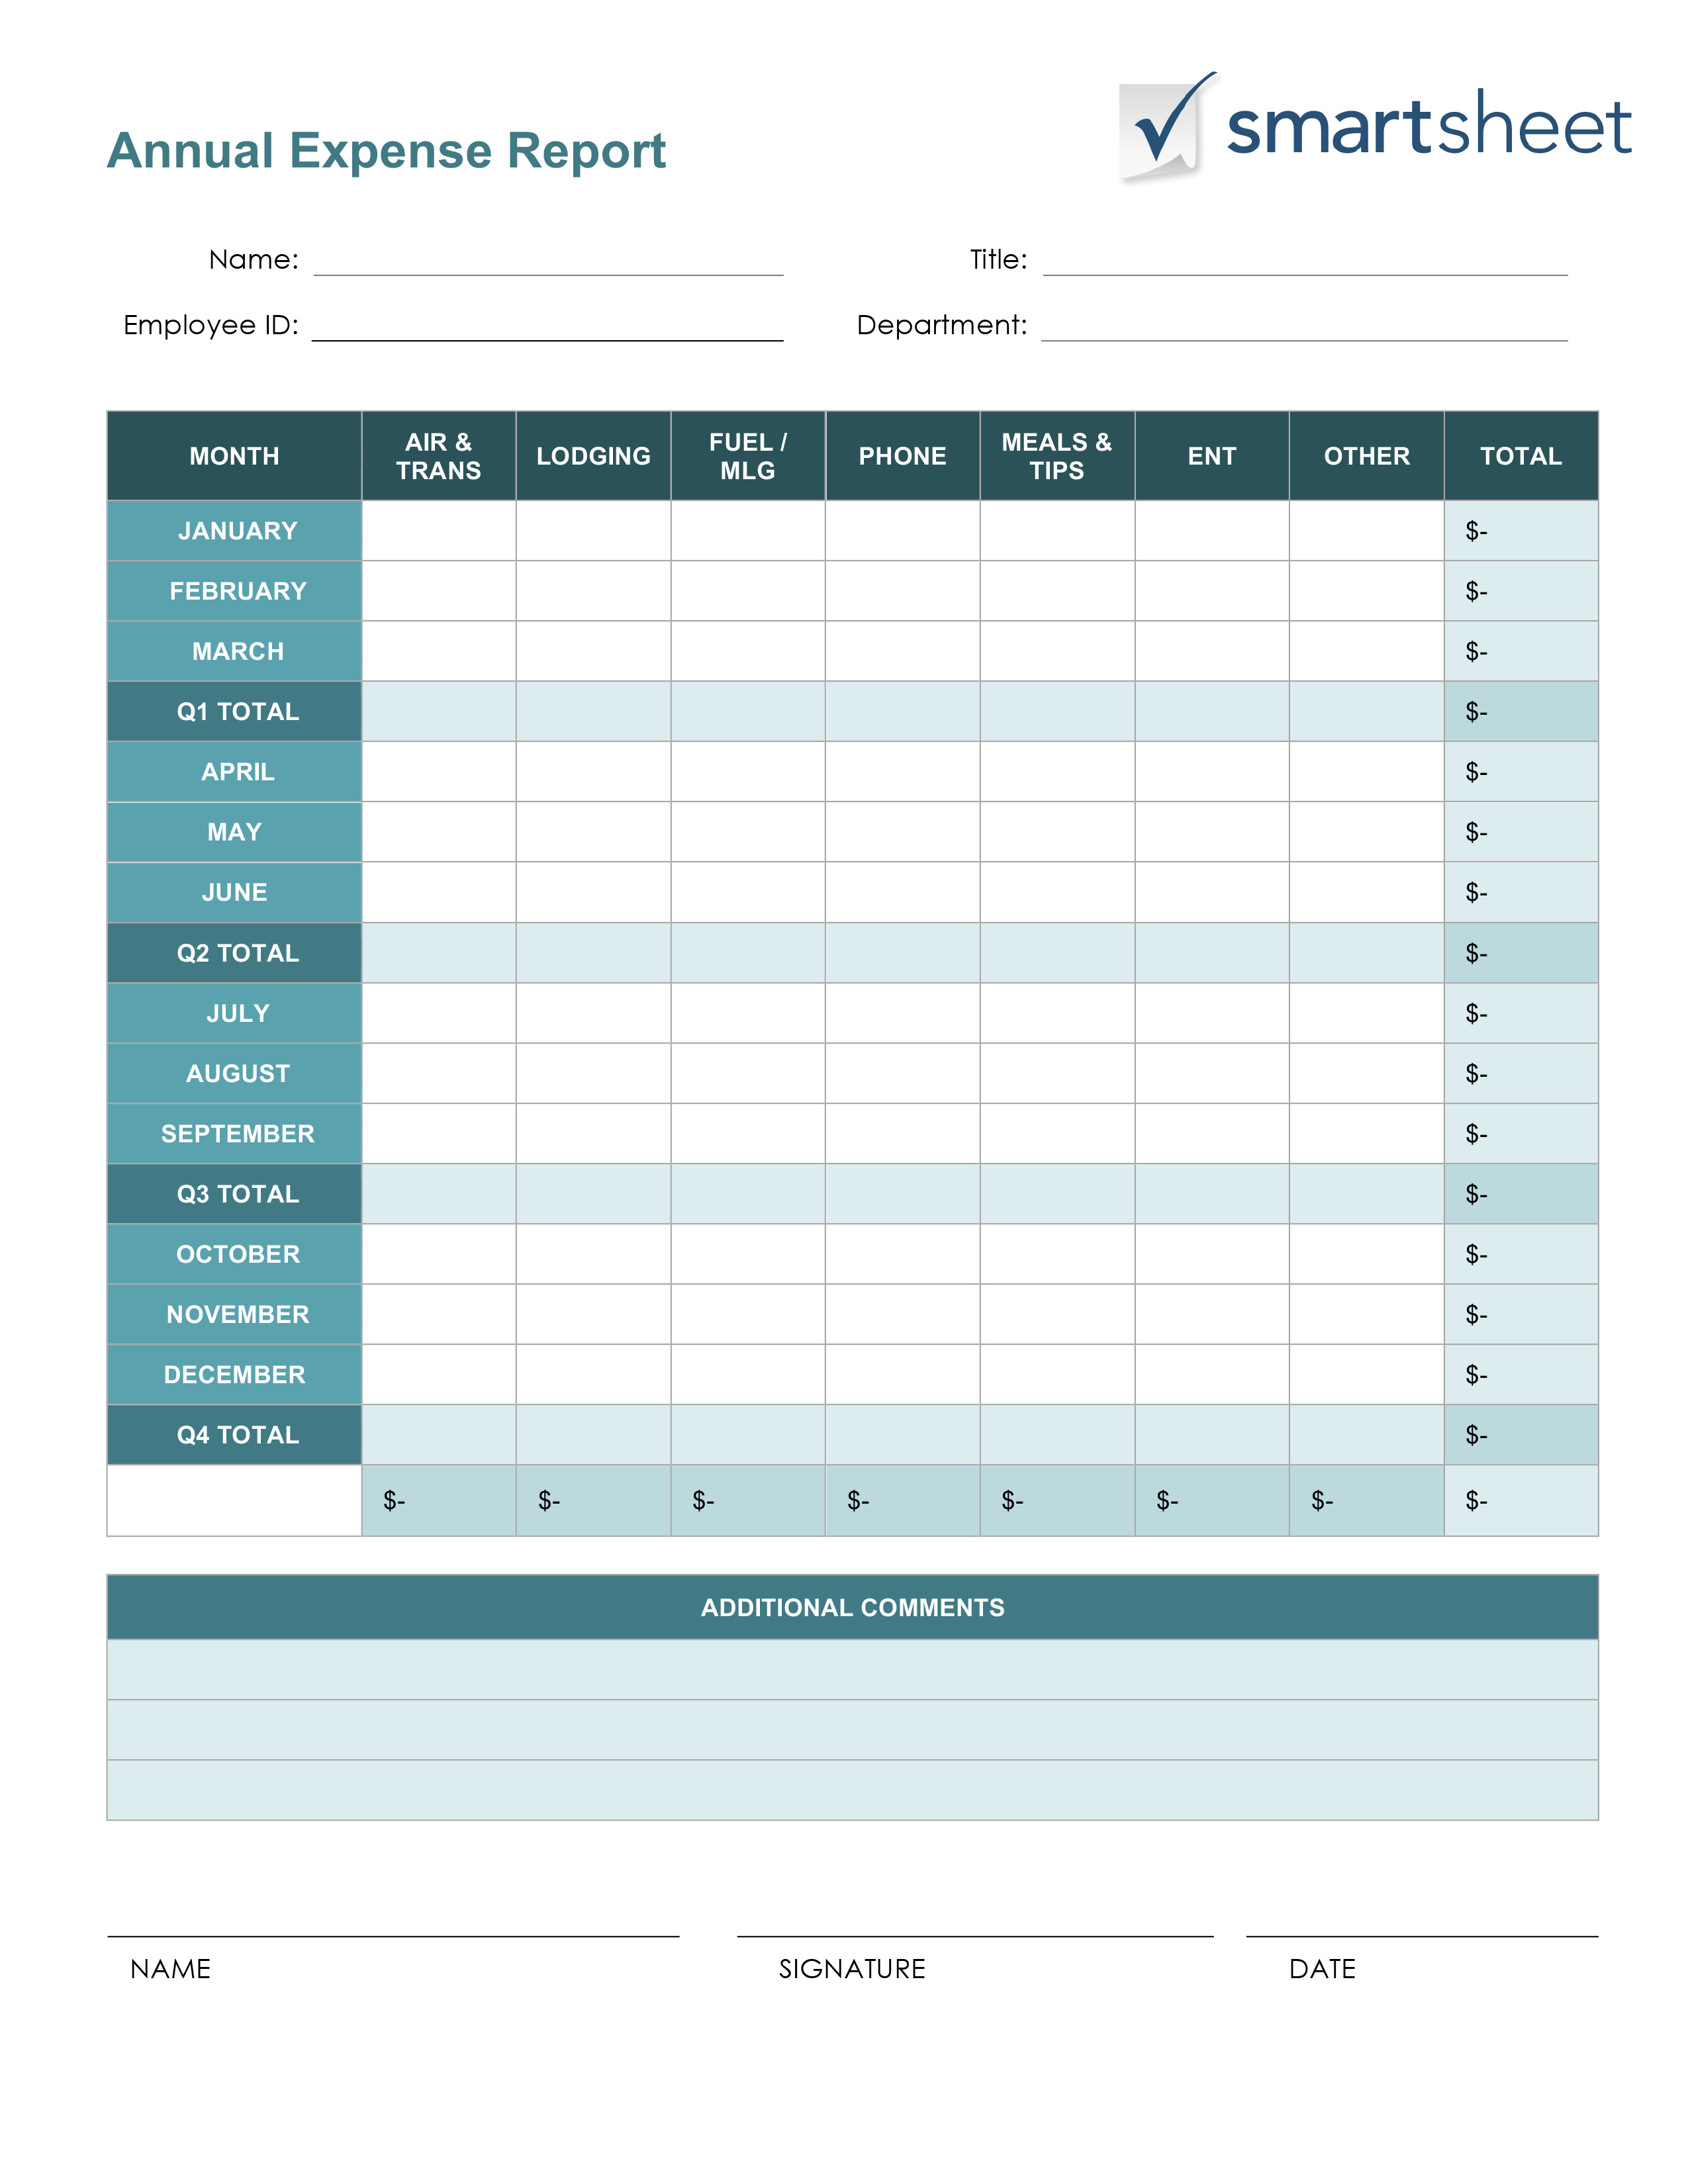 Free Expense Report Templates Smartsheet Within Business Operating Expense Template